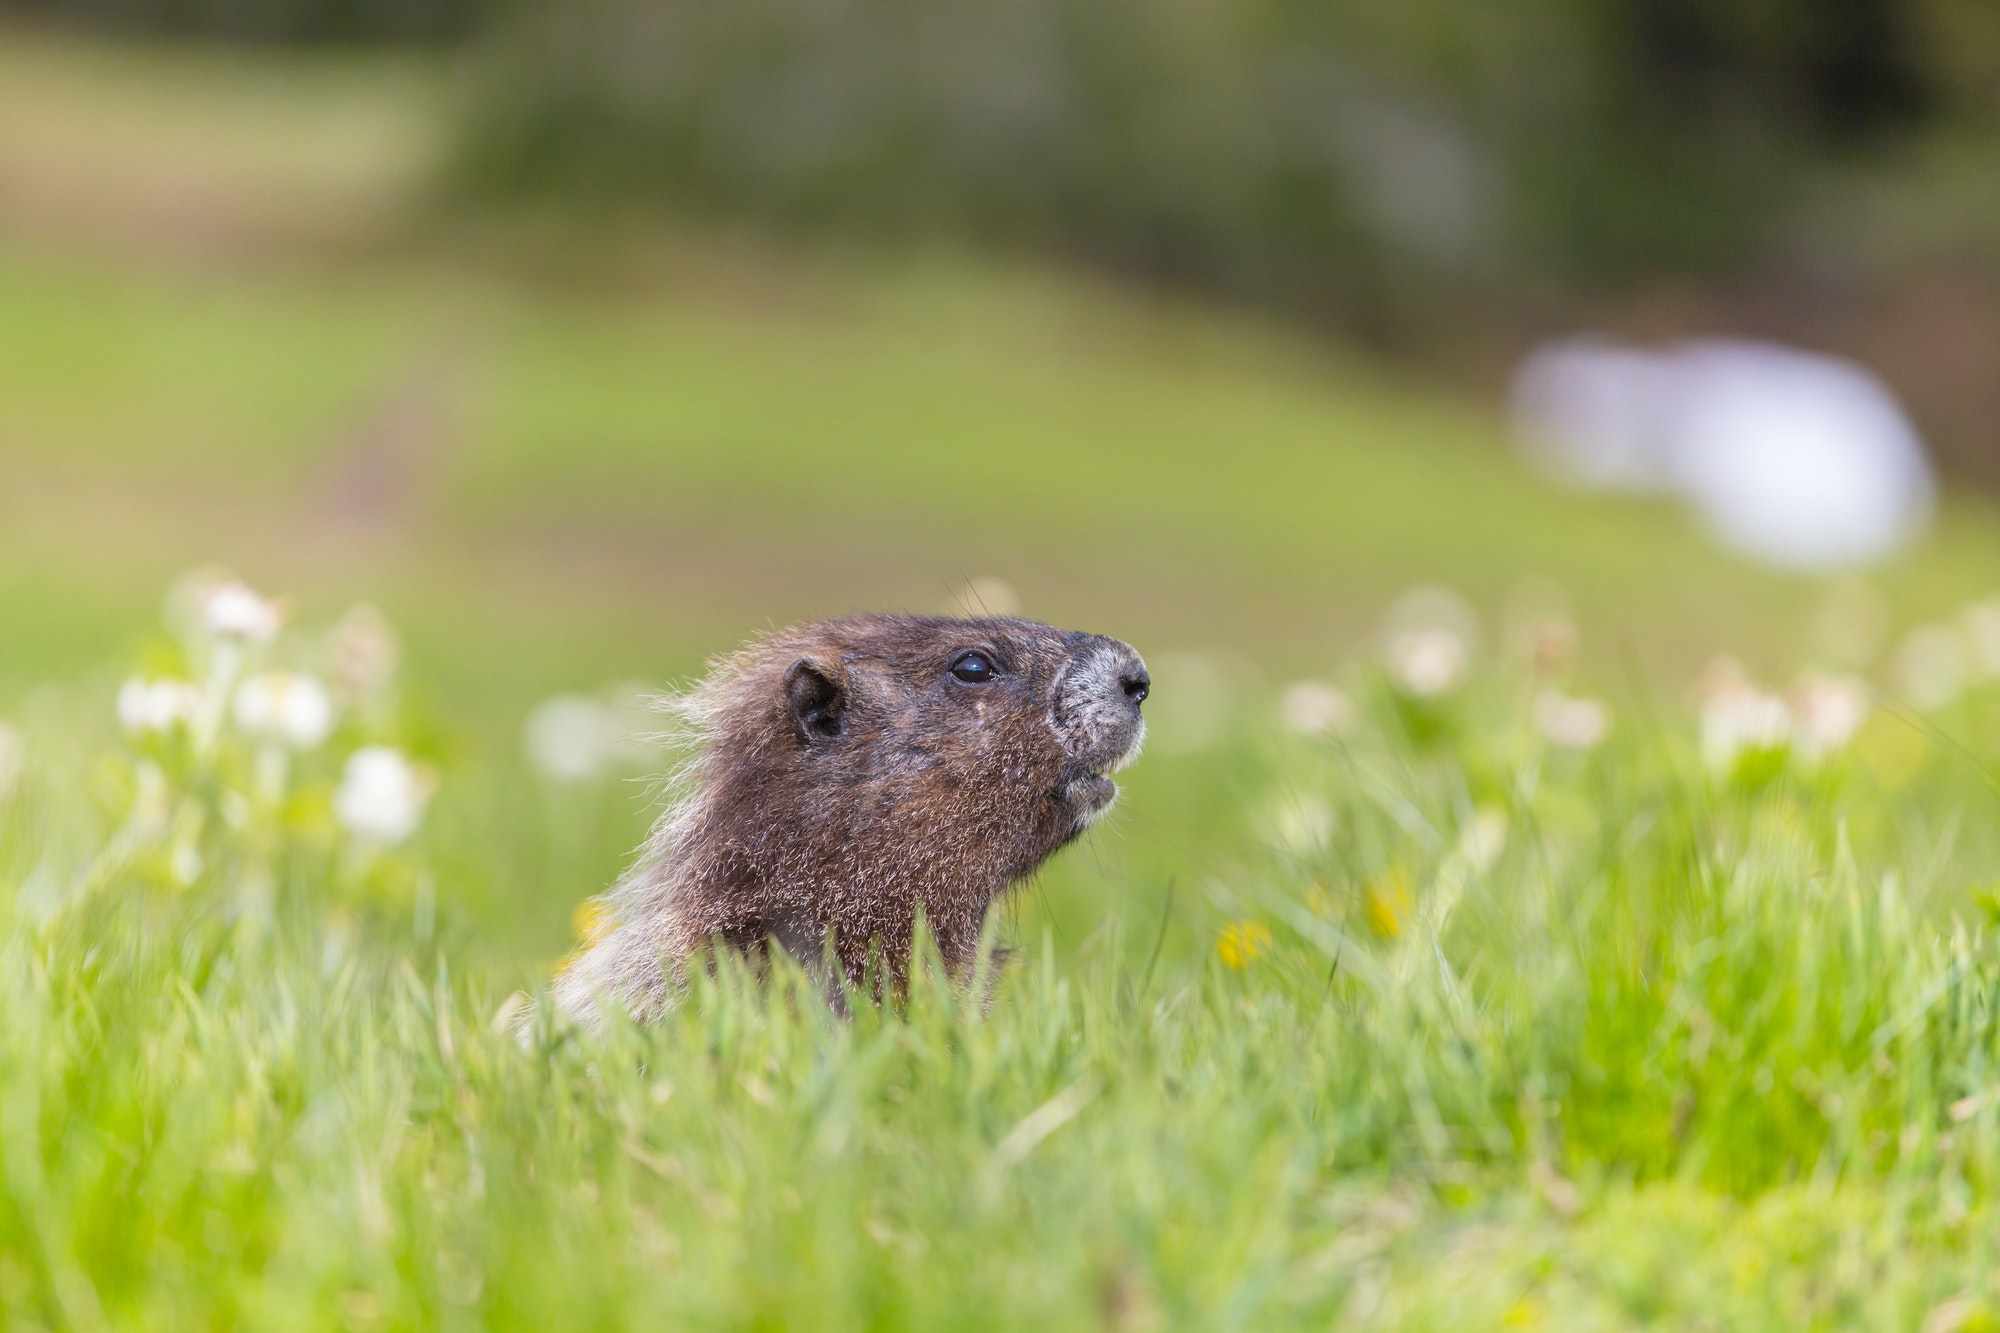 What are woodchucks? — Lydia’s student essay